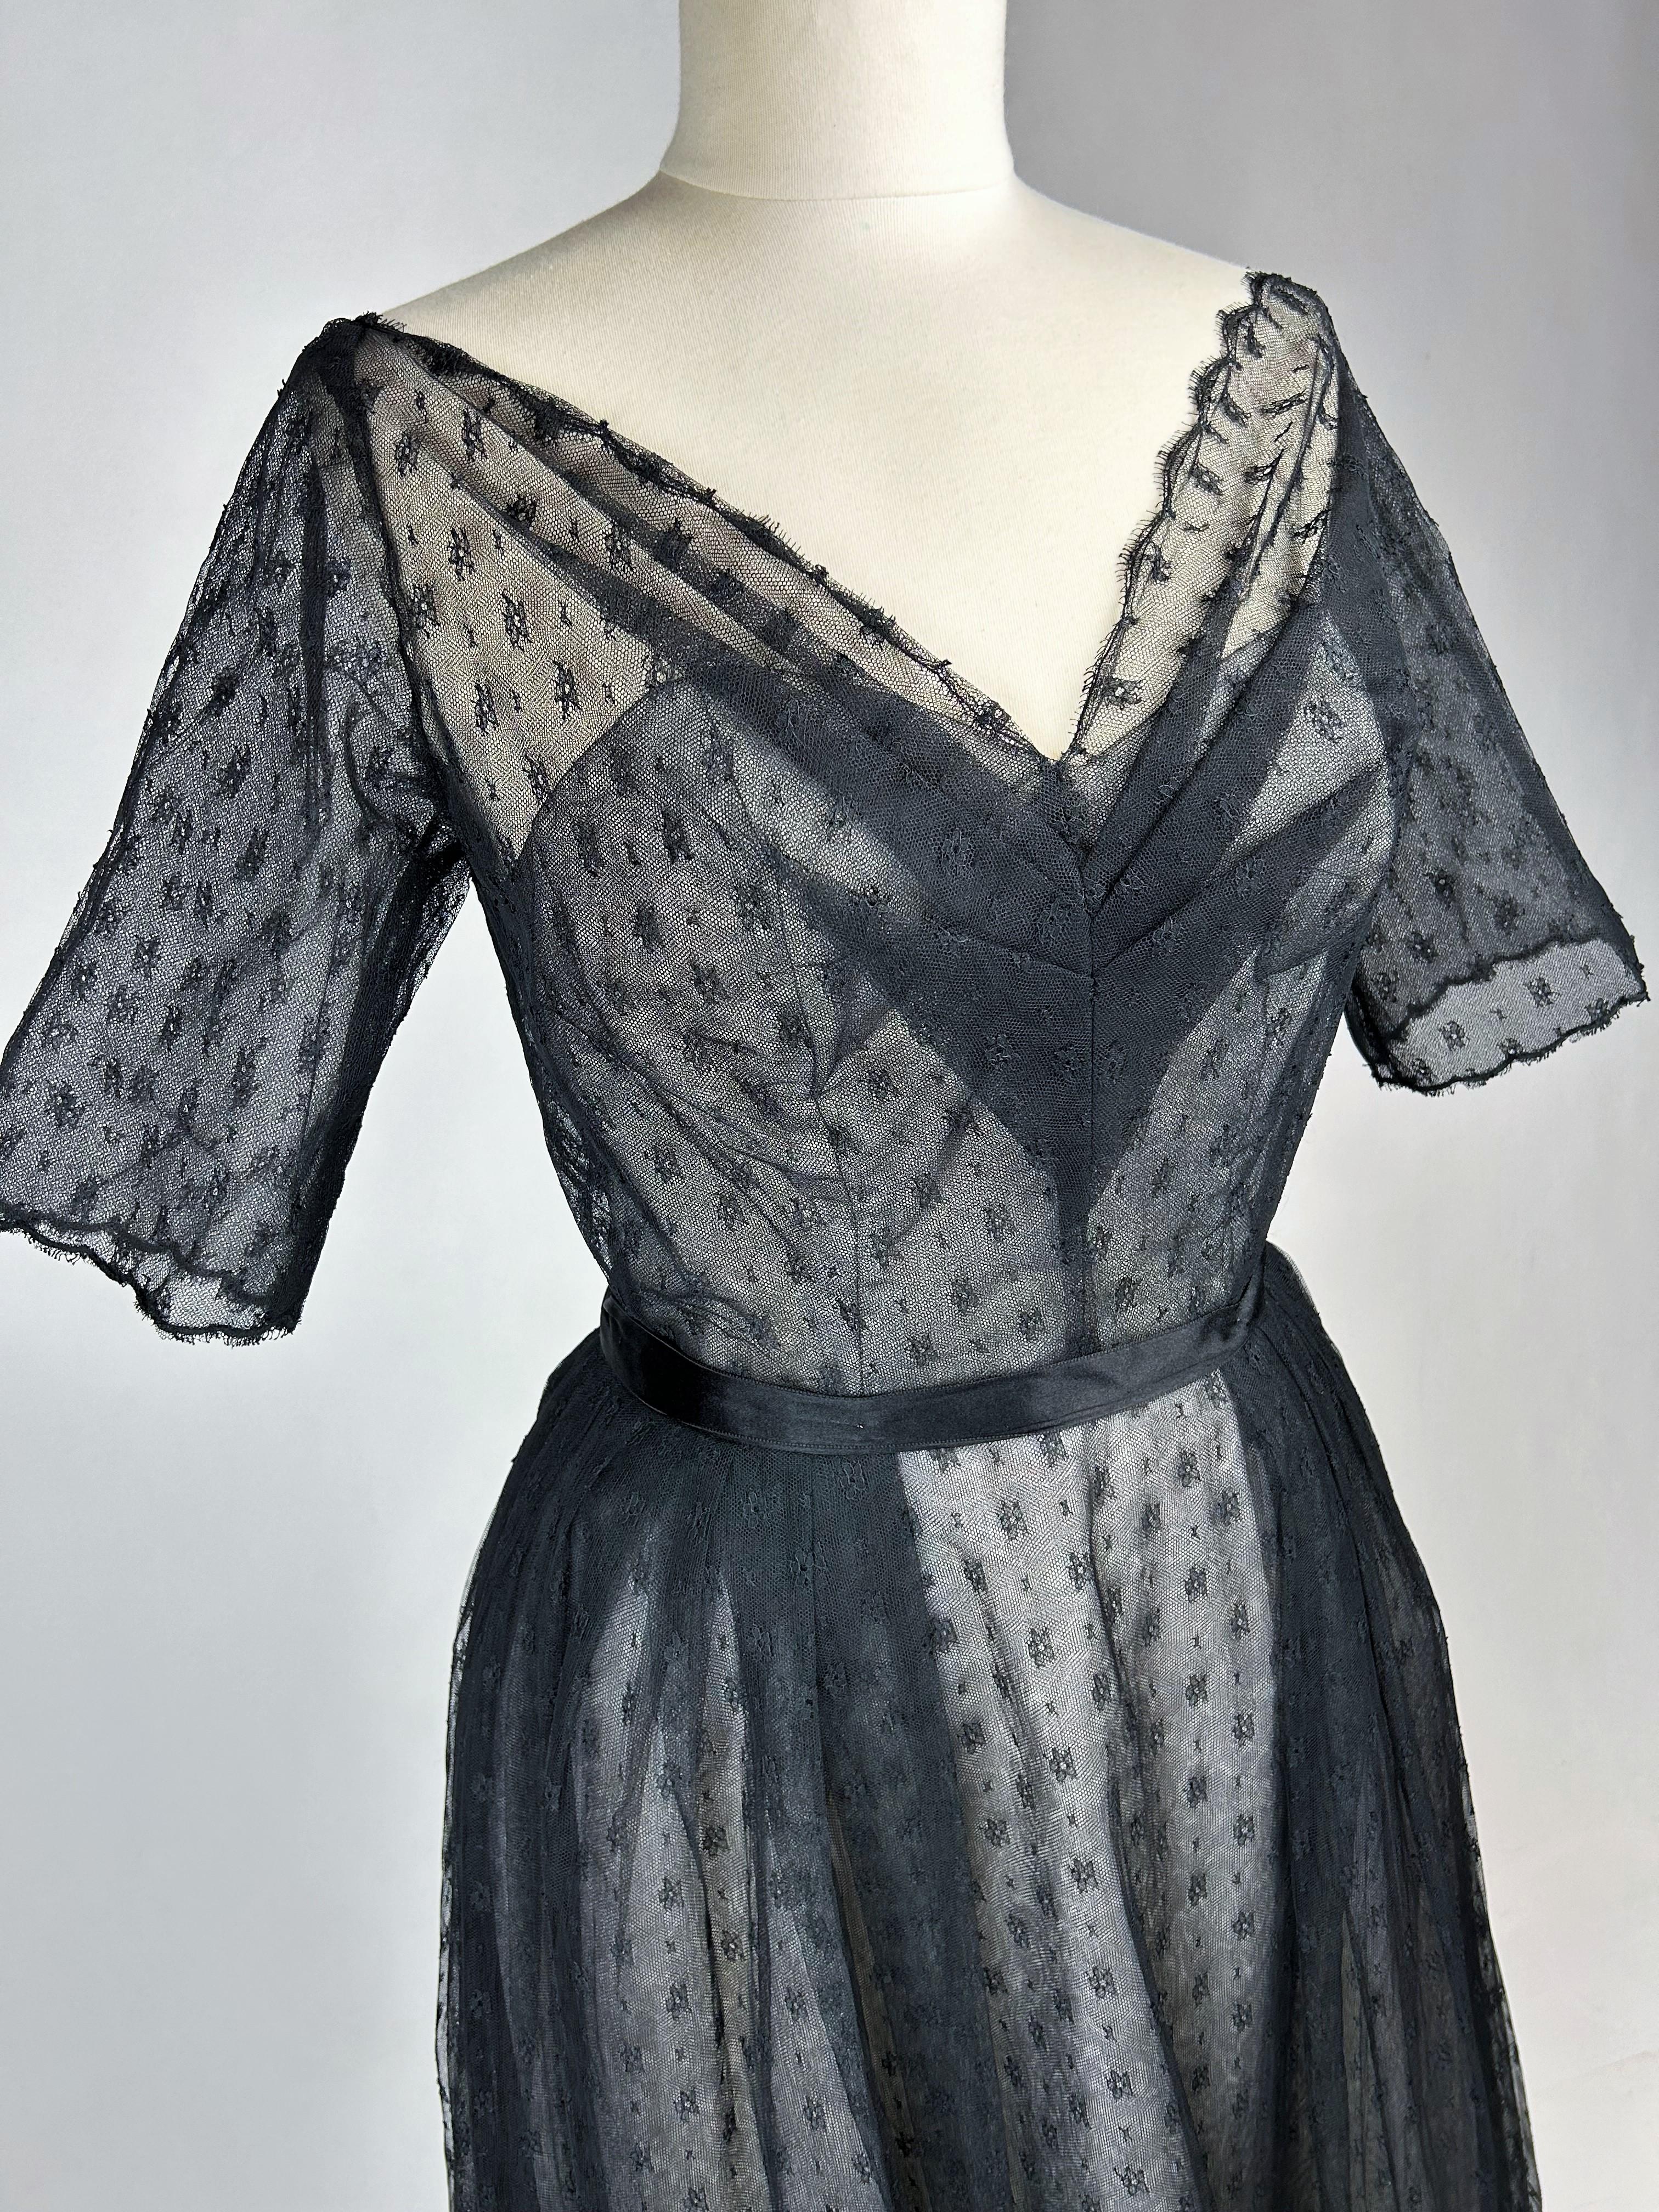 Autumn Winter 1960 Collection
France

Christian Dior/ Yves Mathieu Saint Laurent (attributed to) long evening dress in black Calais lace, Almaviva model.  White whalebone bustier with large neckline covered with embroidered tulle, raglan sleeves,